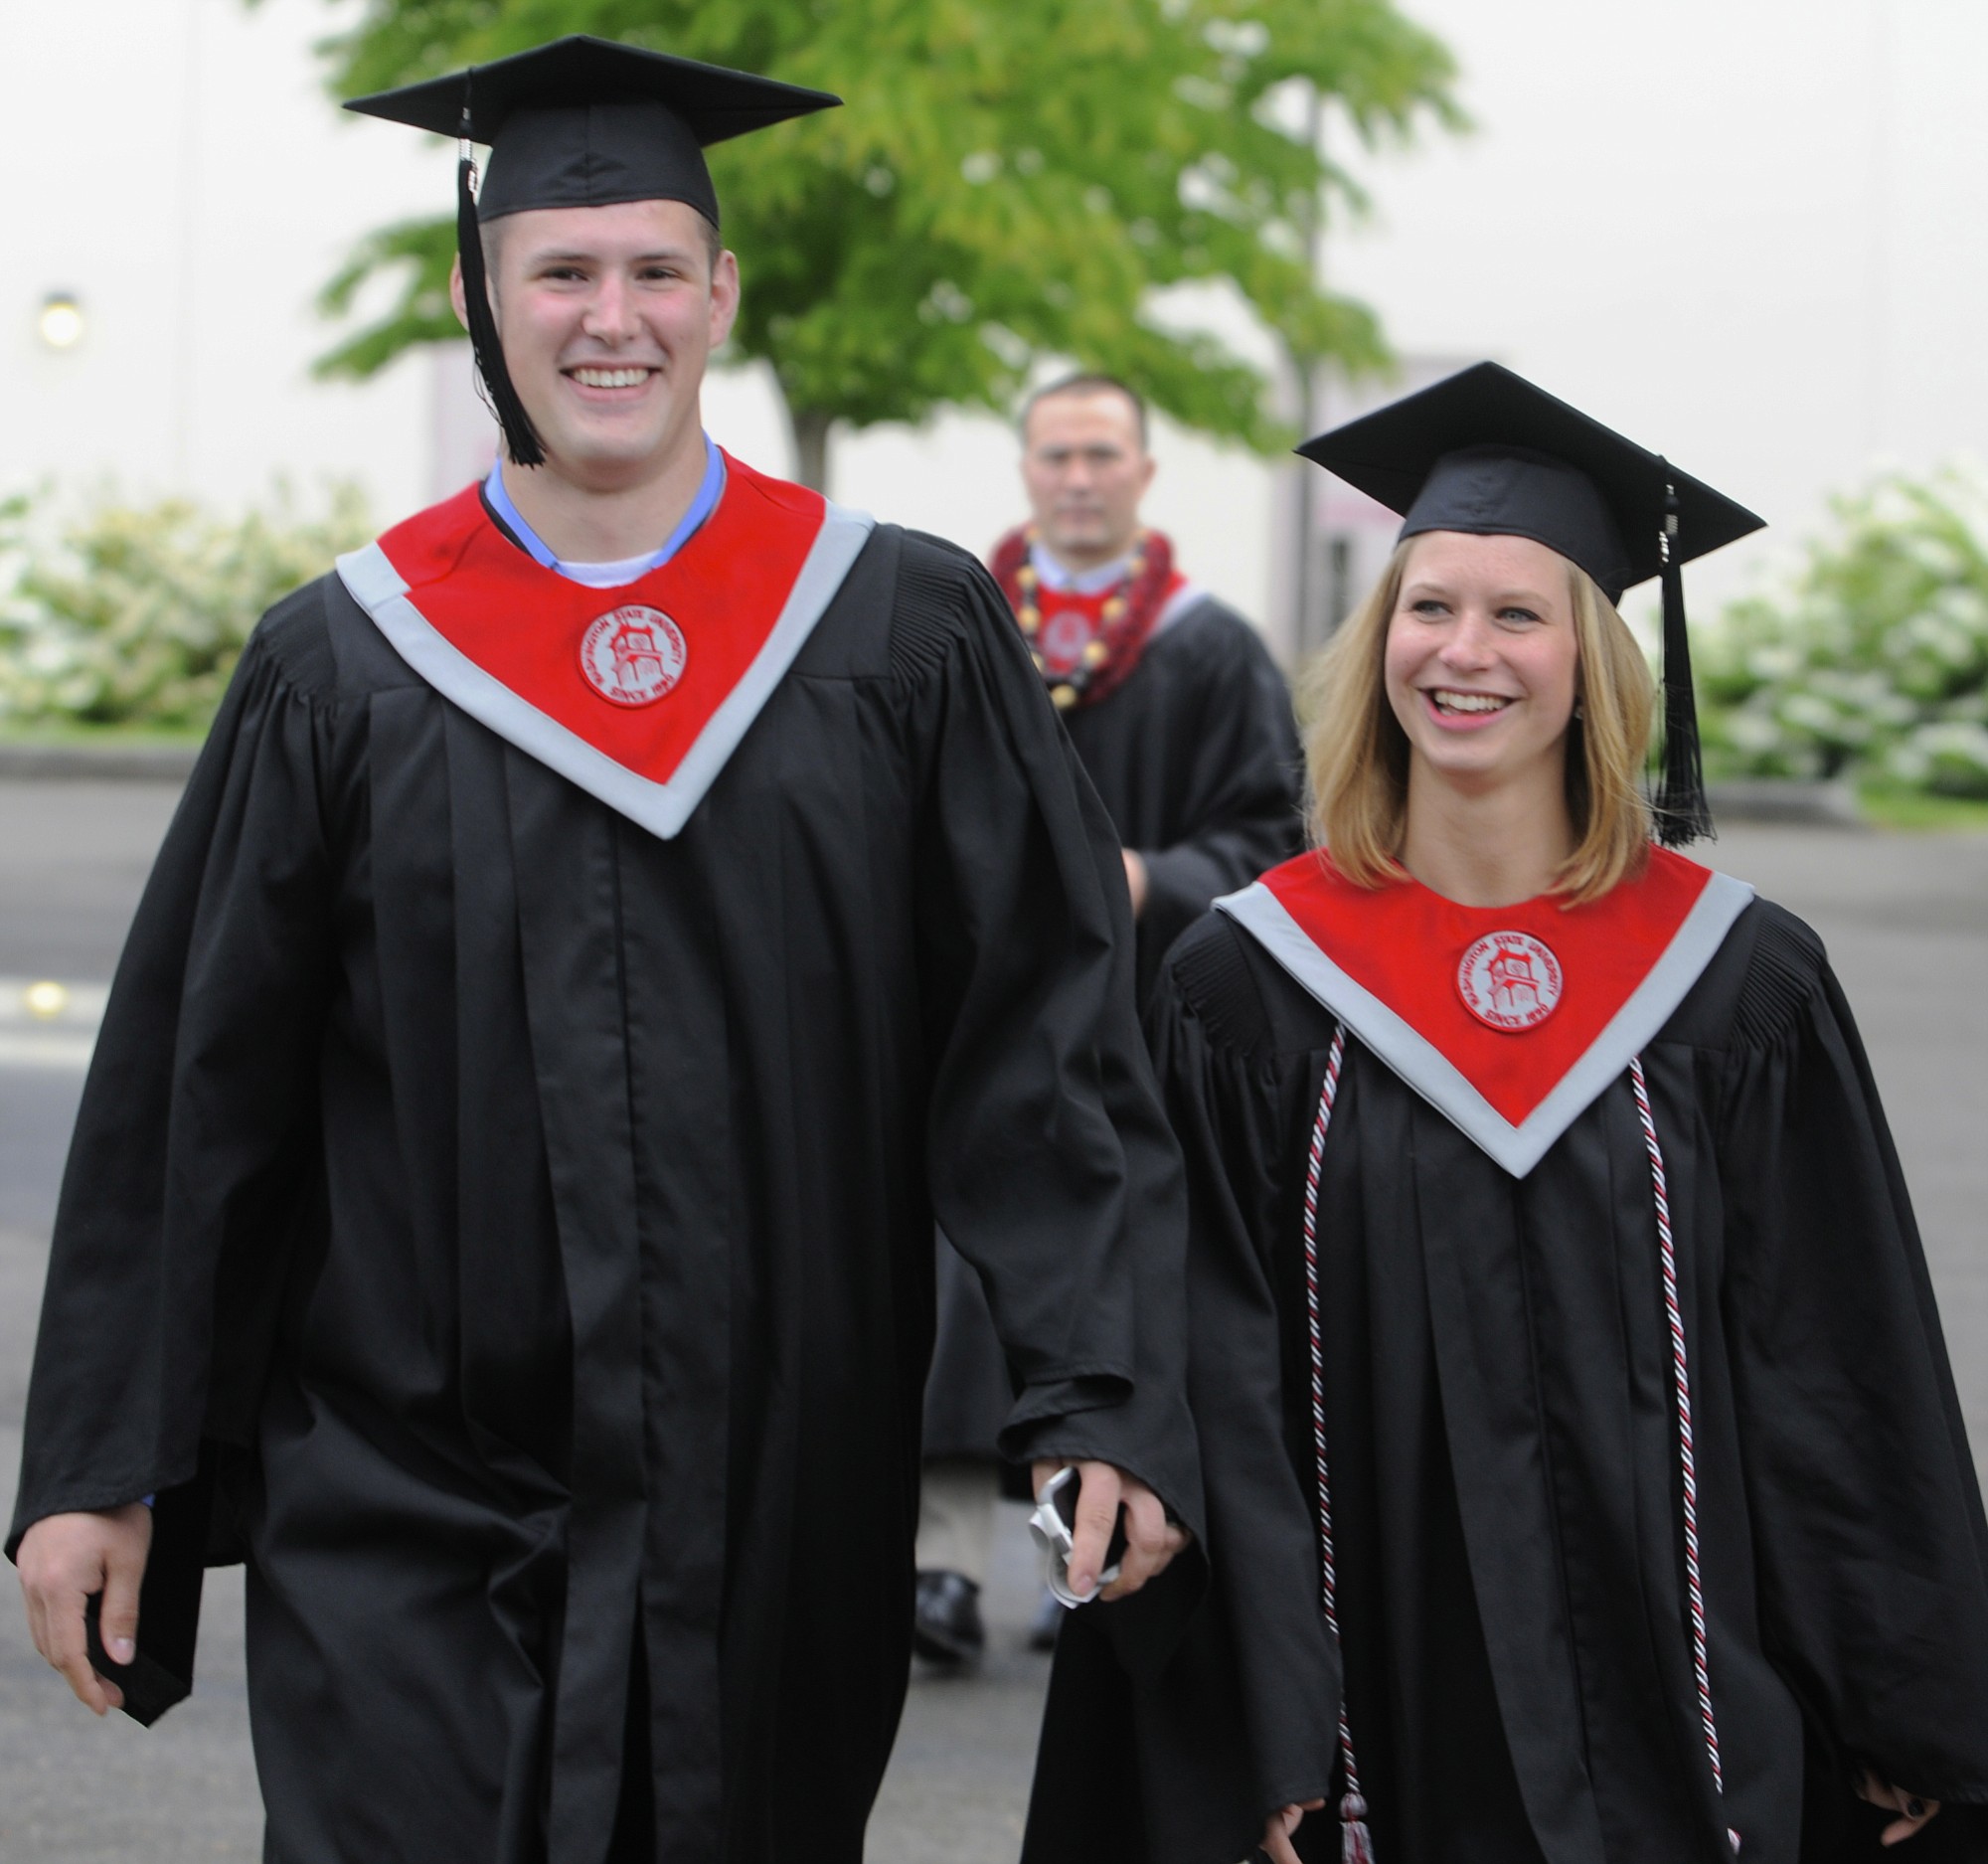 Washington State University's 2014 graduates Zach and Kendall Nielsen together prior to their commencement ceremony Saturday in Ridgefield.